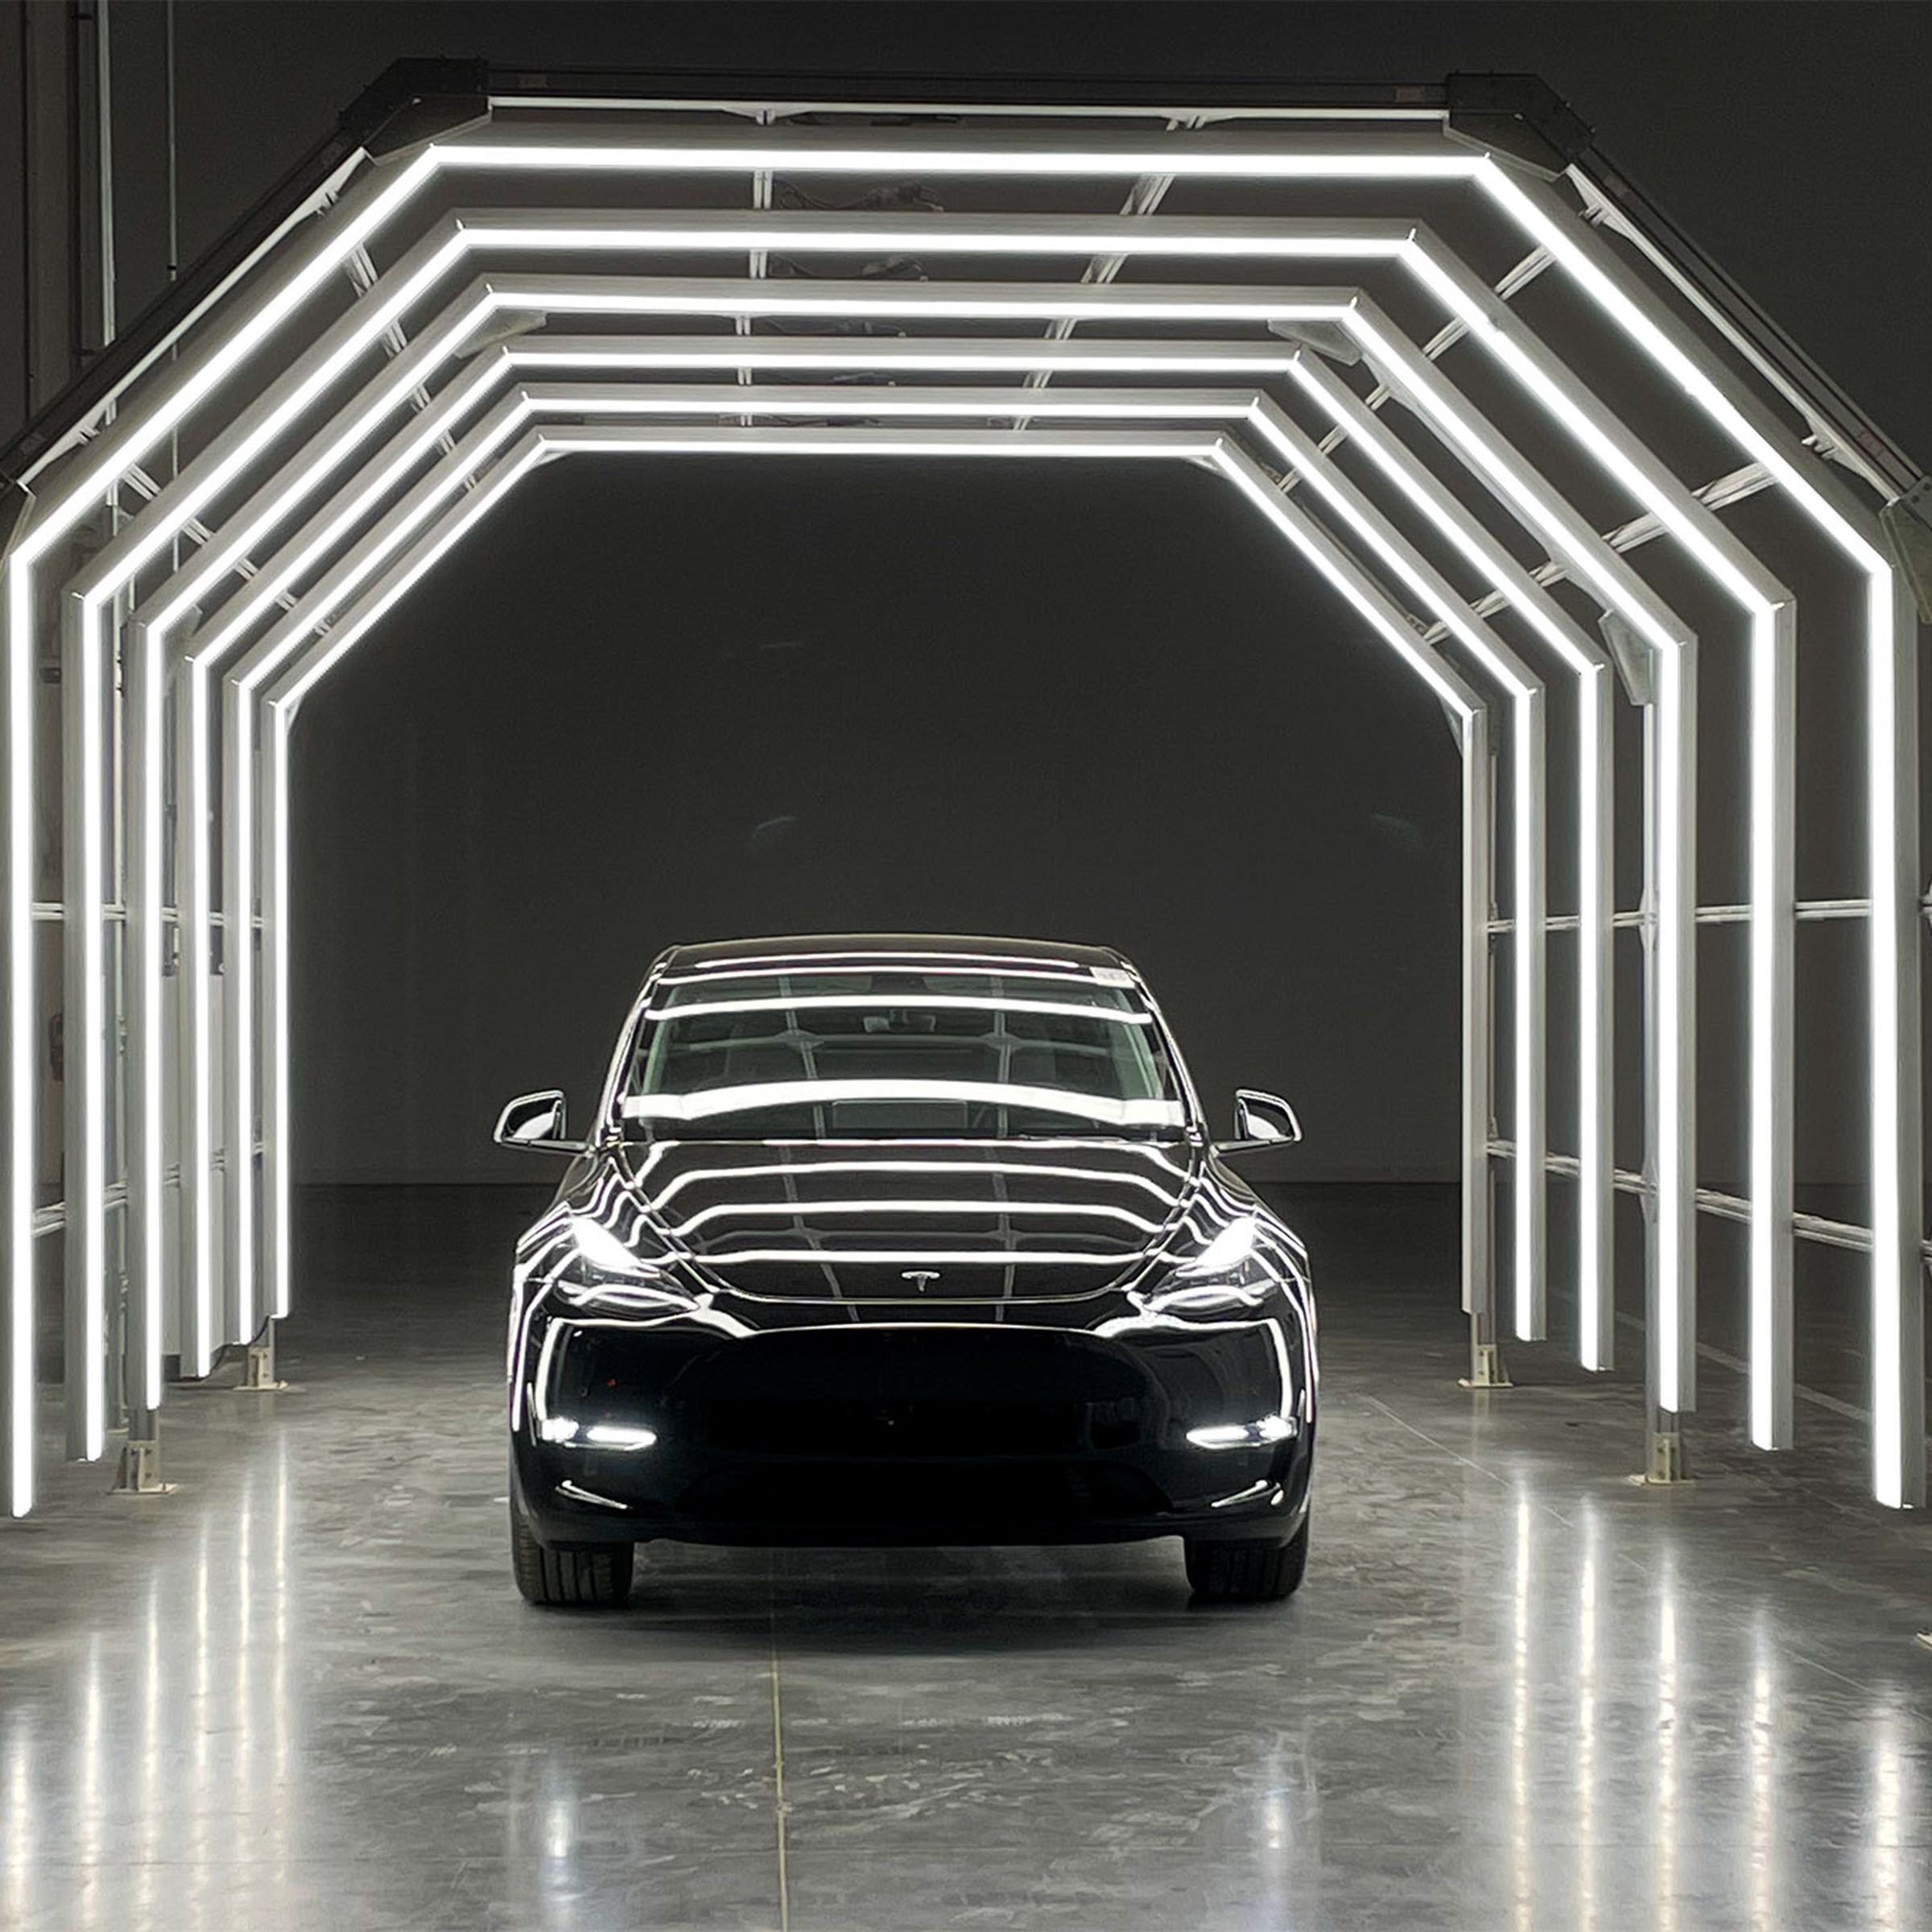 A Tesla vehicle in a lighted tunnel.